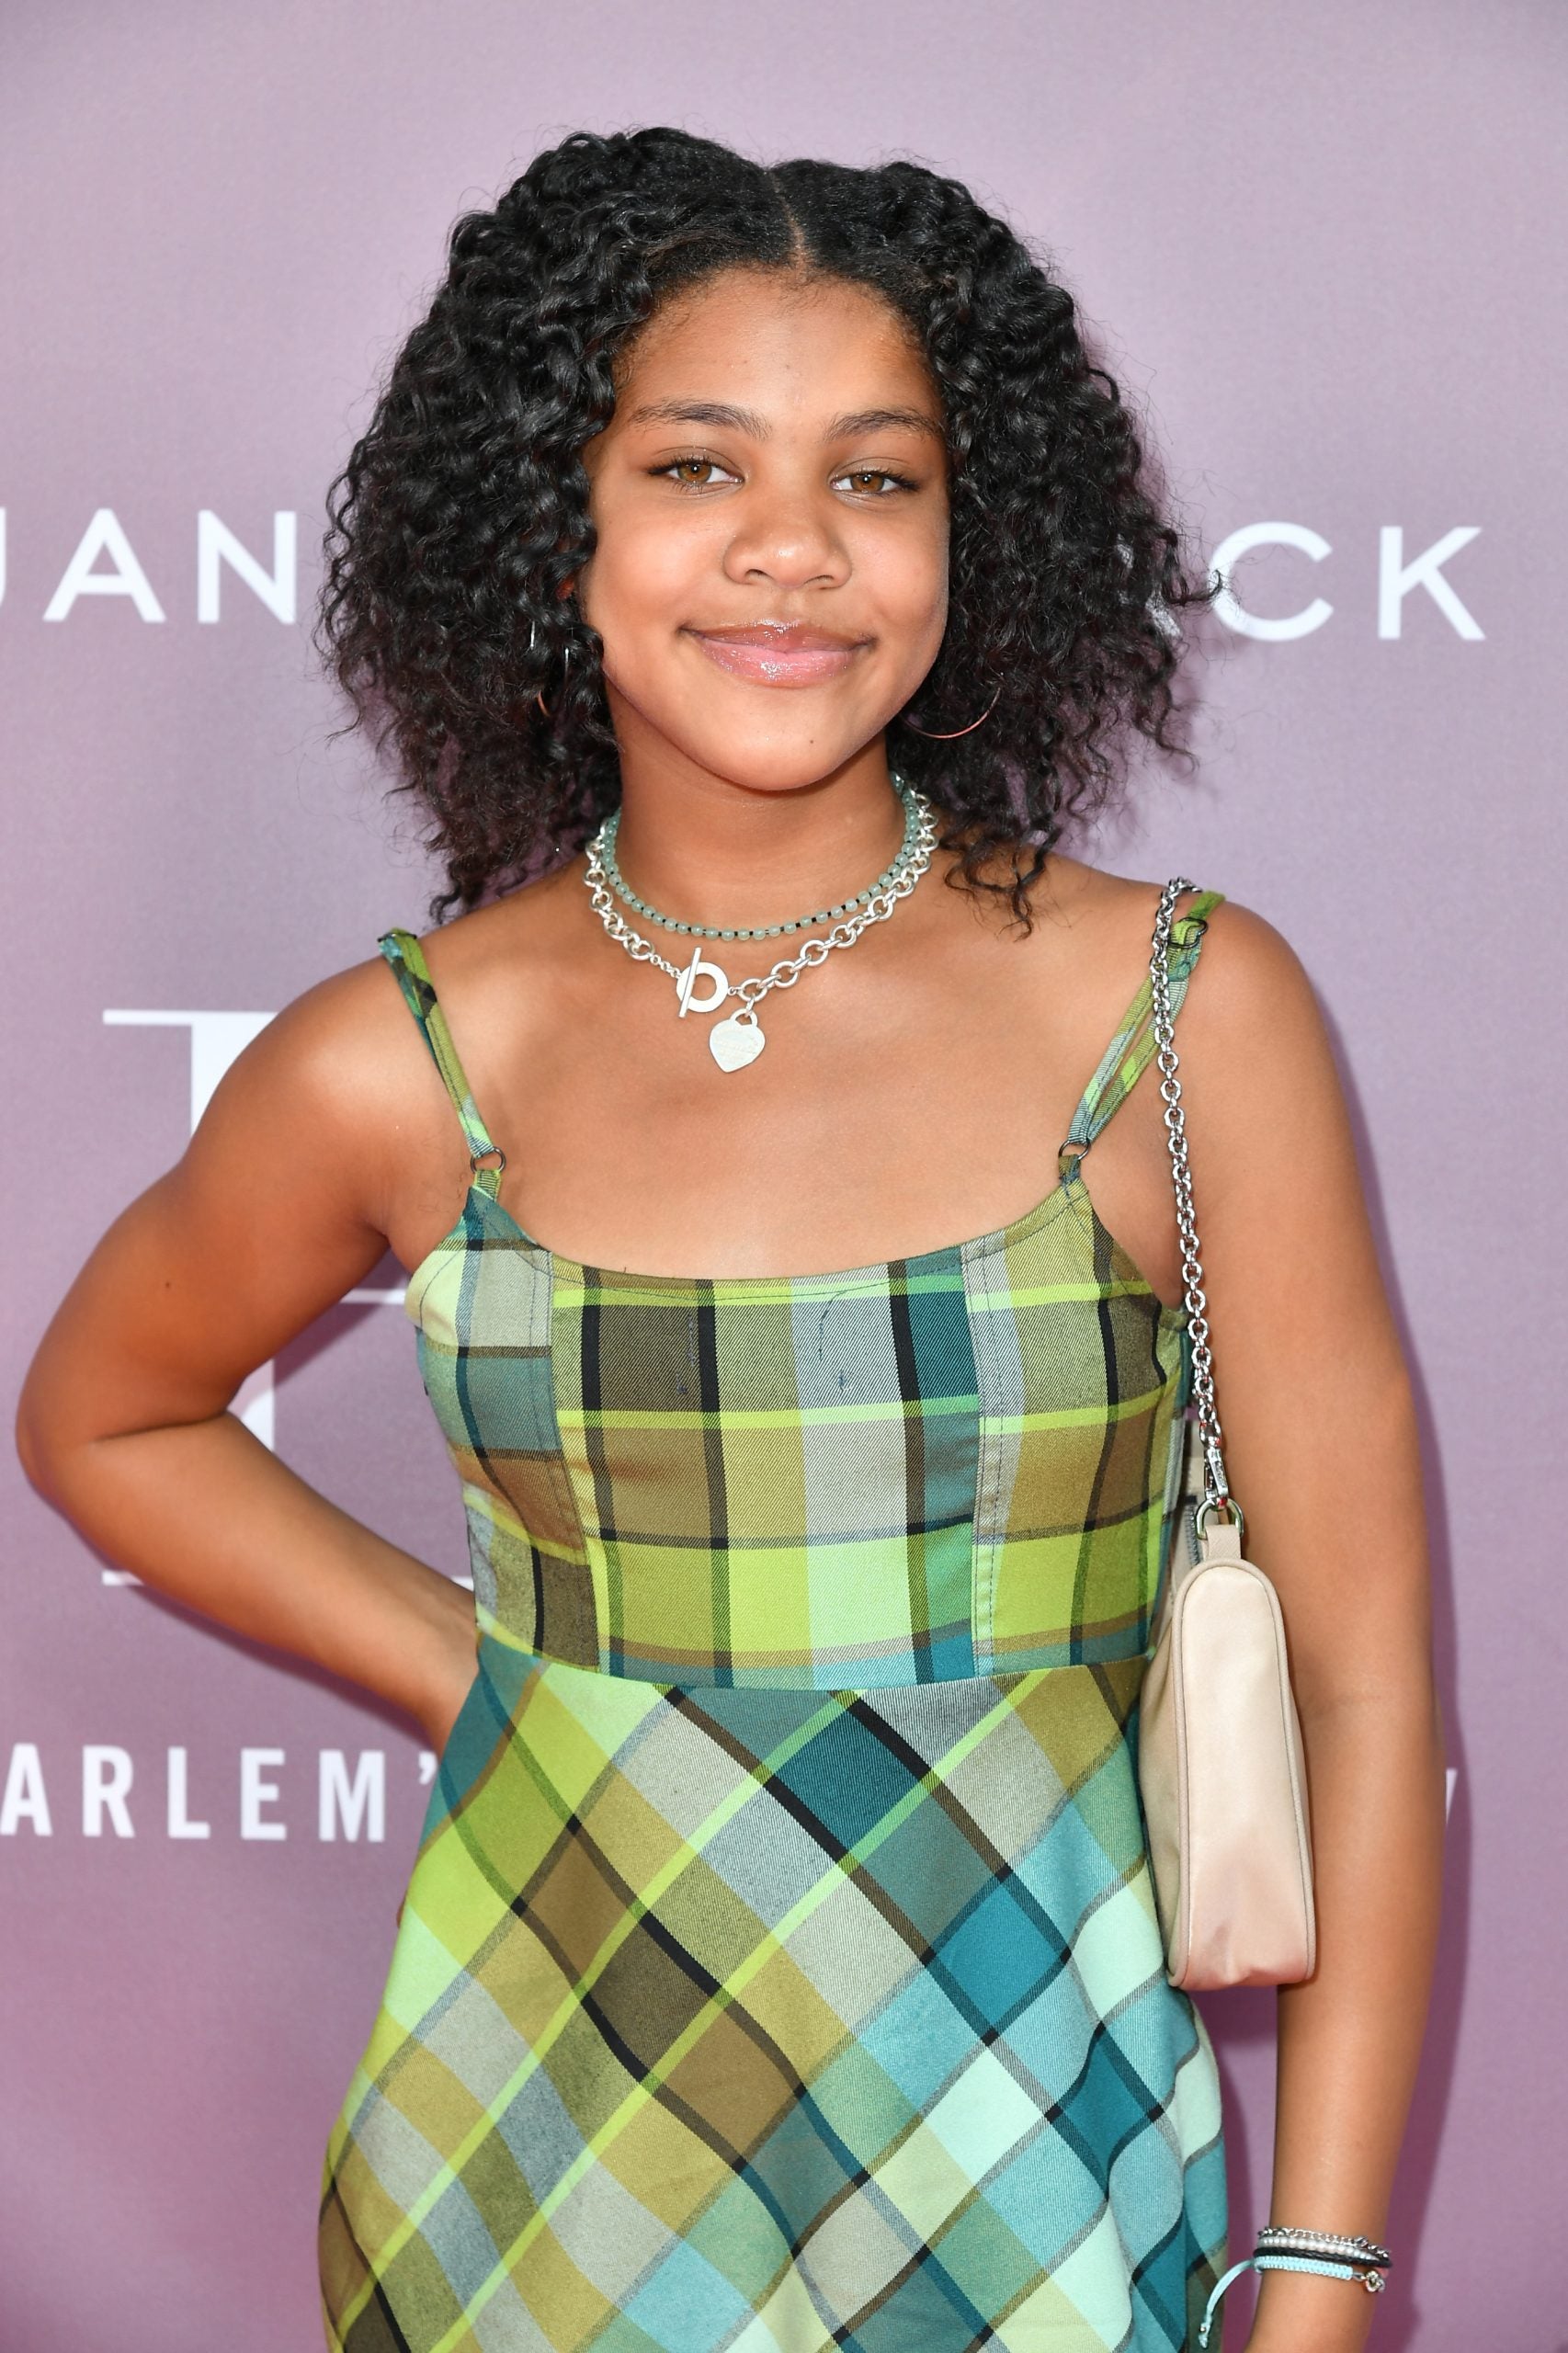 A Who's Who Of Celeb Kids Hit The Red Carpet To Launch Janie And Jack x Harlem’s Fashion Row's New Collection